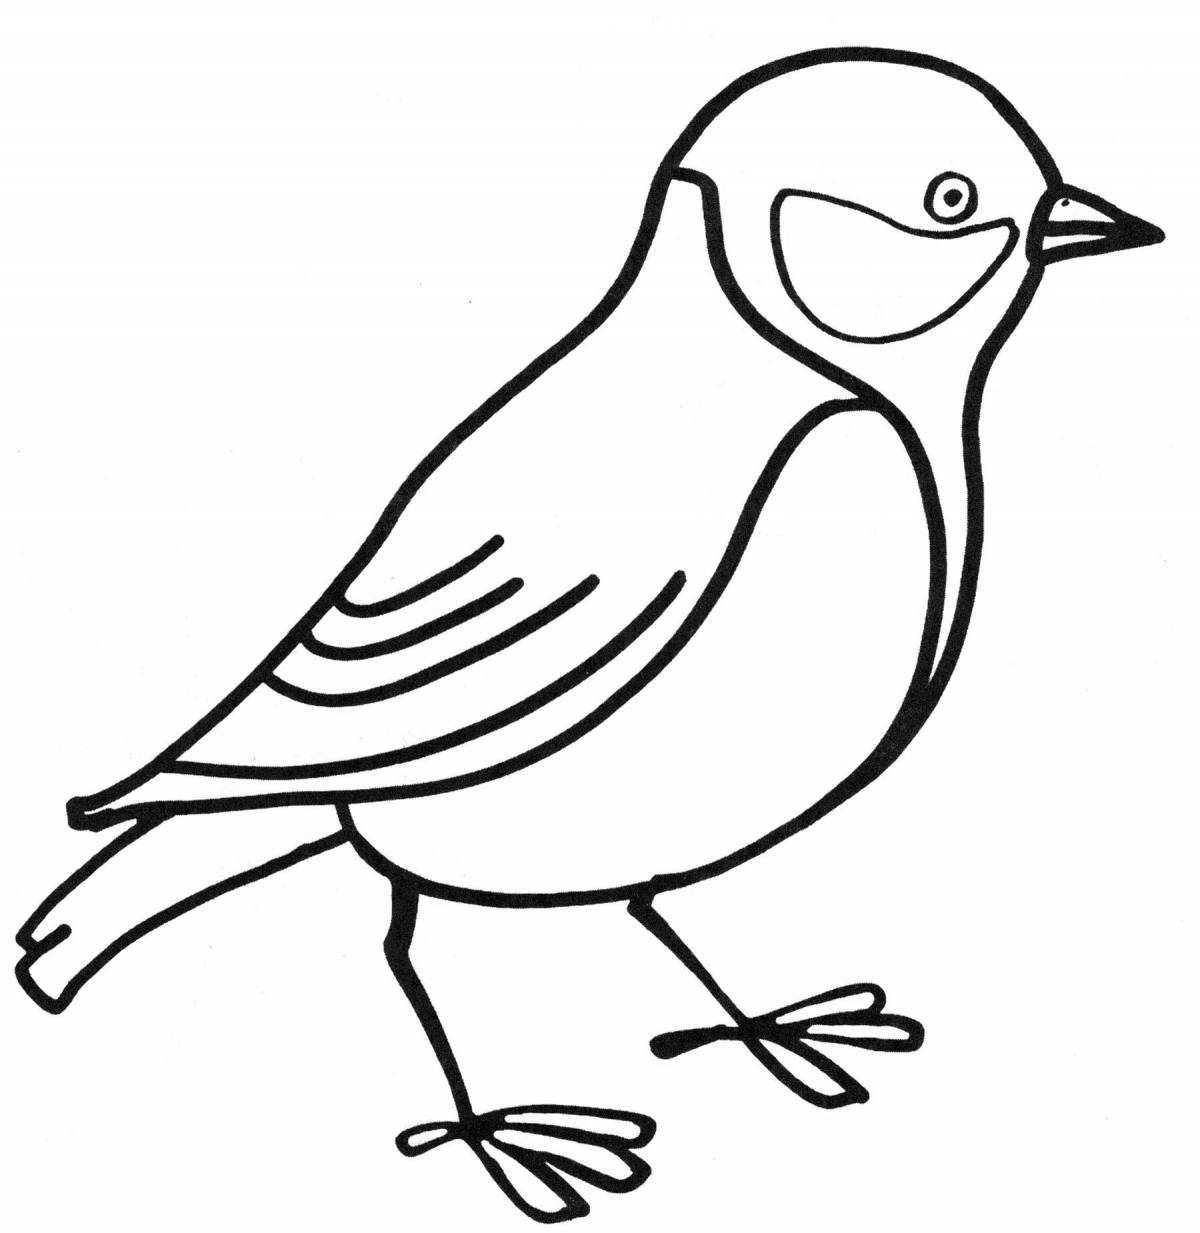 Coloring book funny titmouse for children 4-5 years old